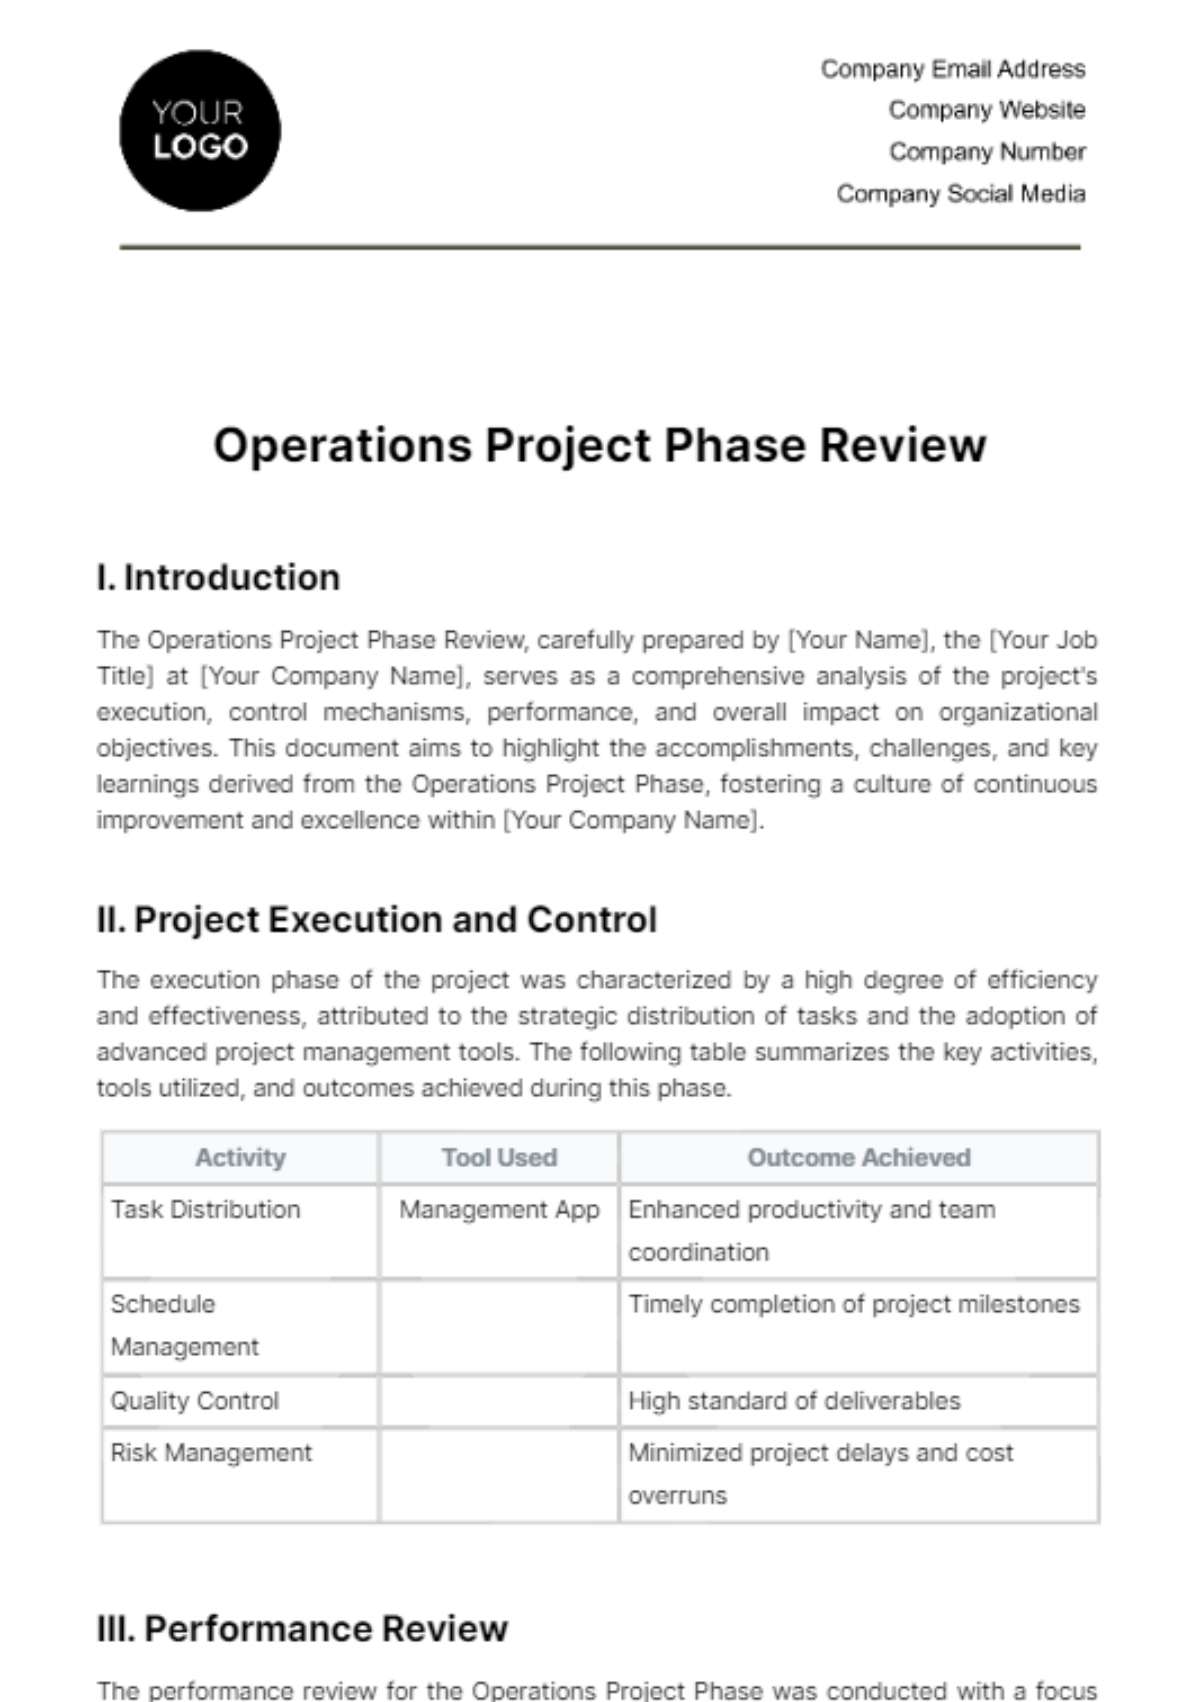 Operations Project Phase Review Template